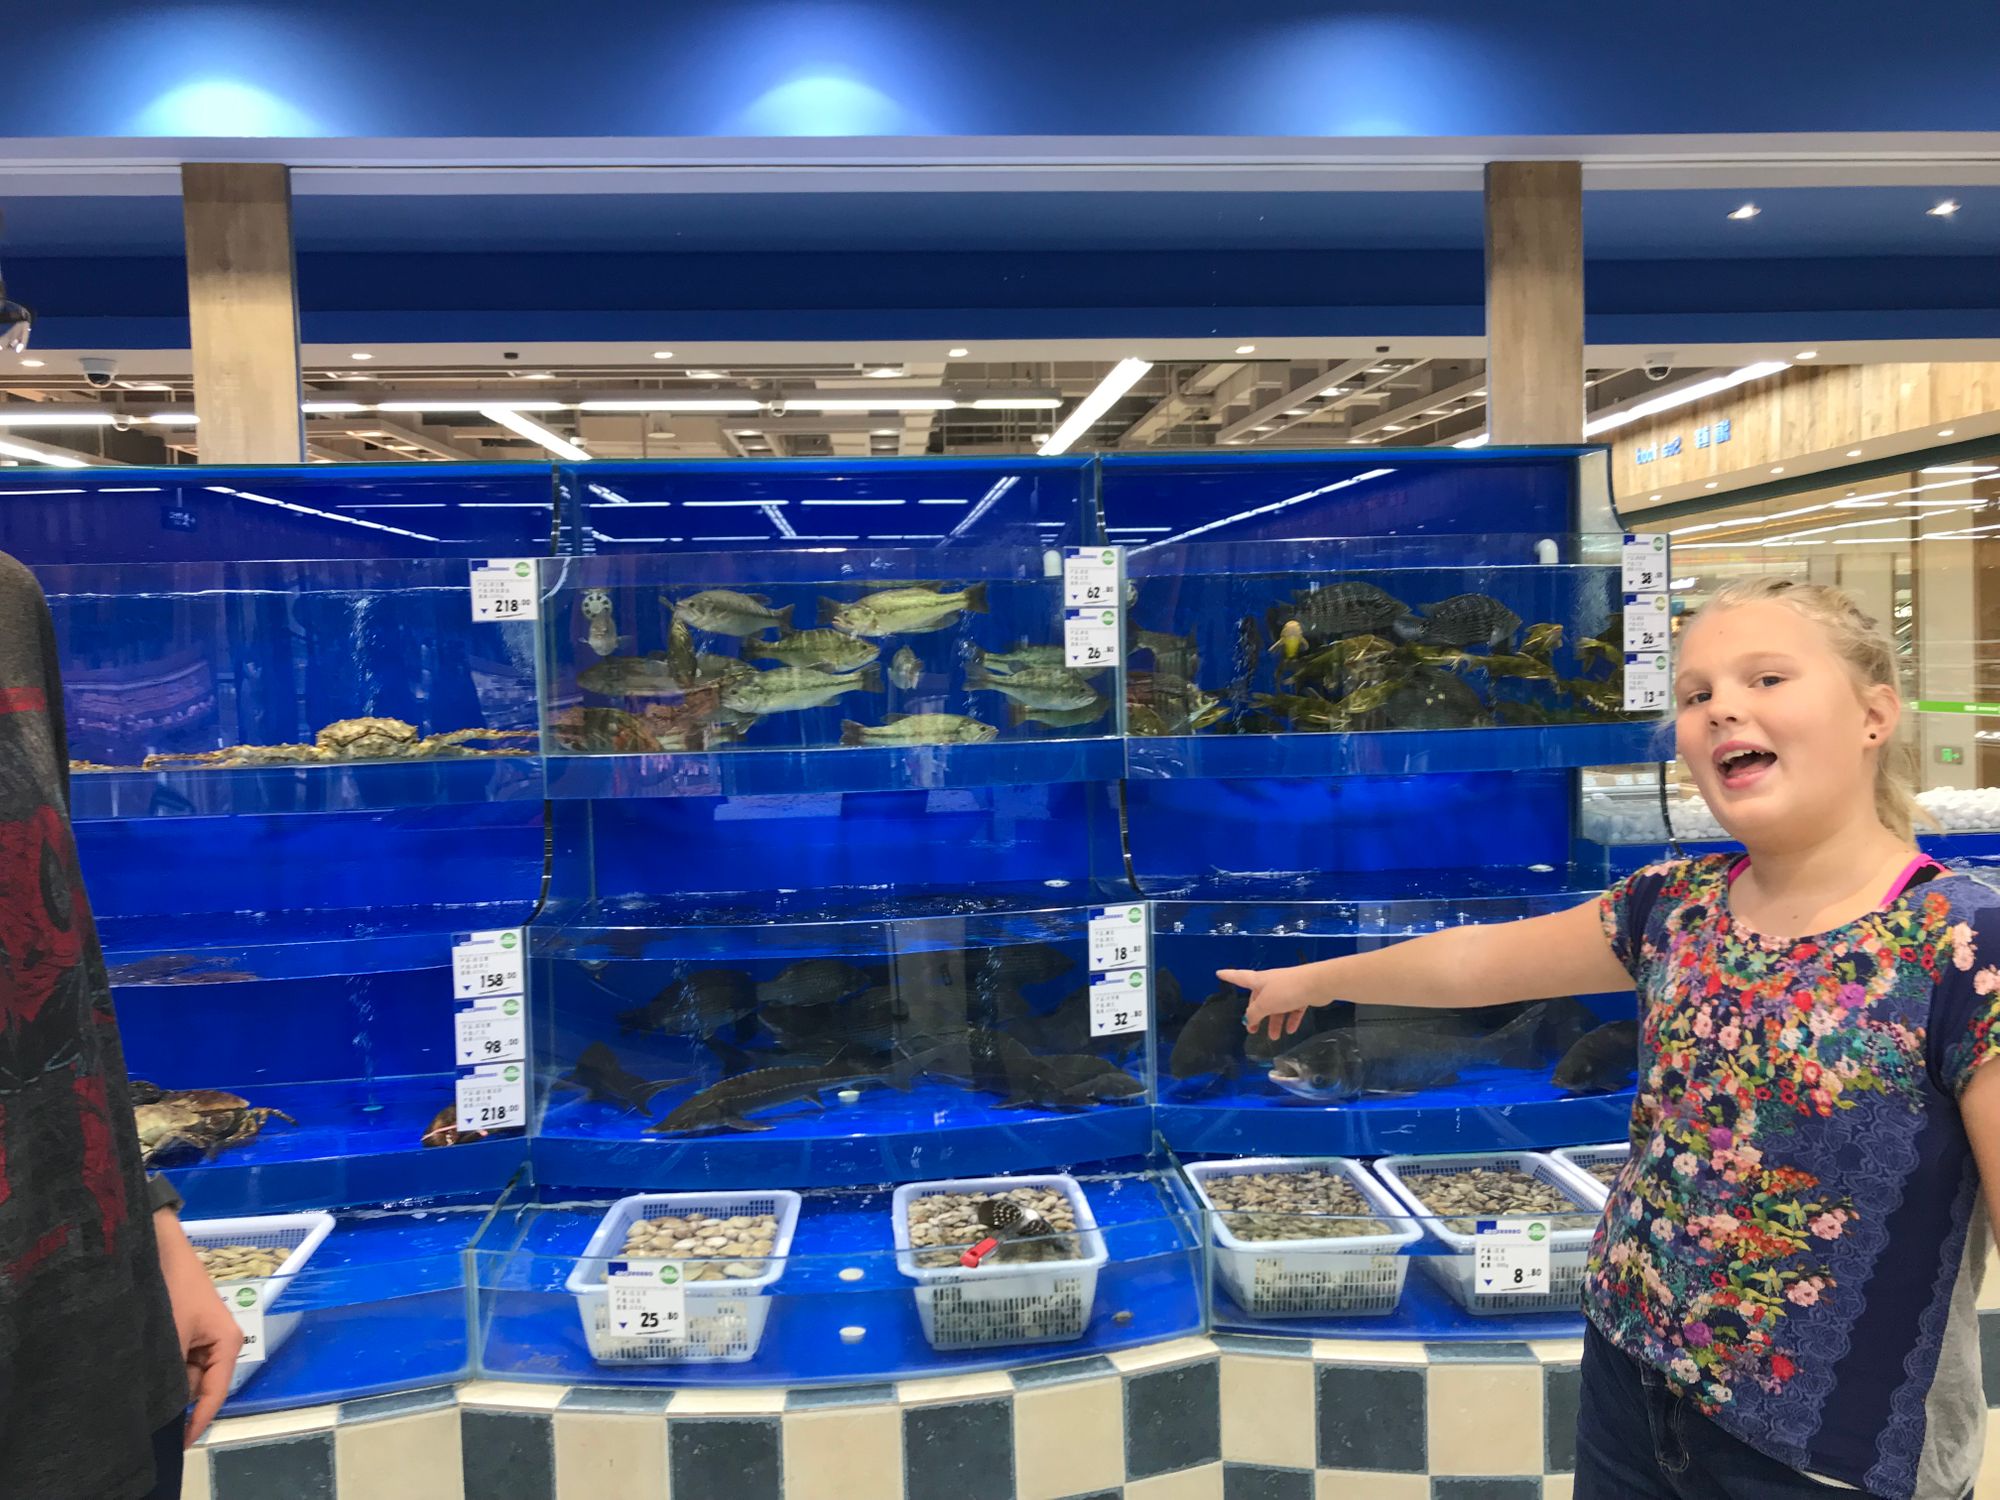 Grocery stores and Aquariums (all in one)